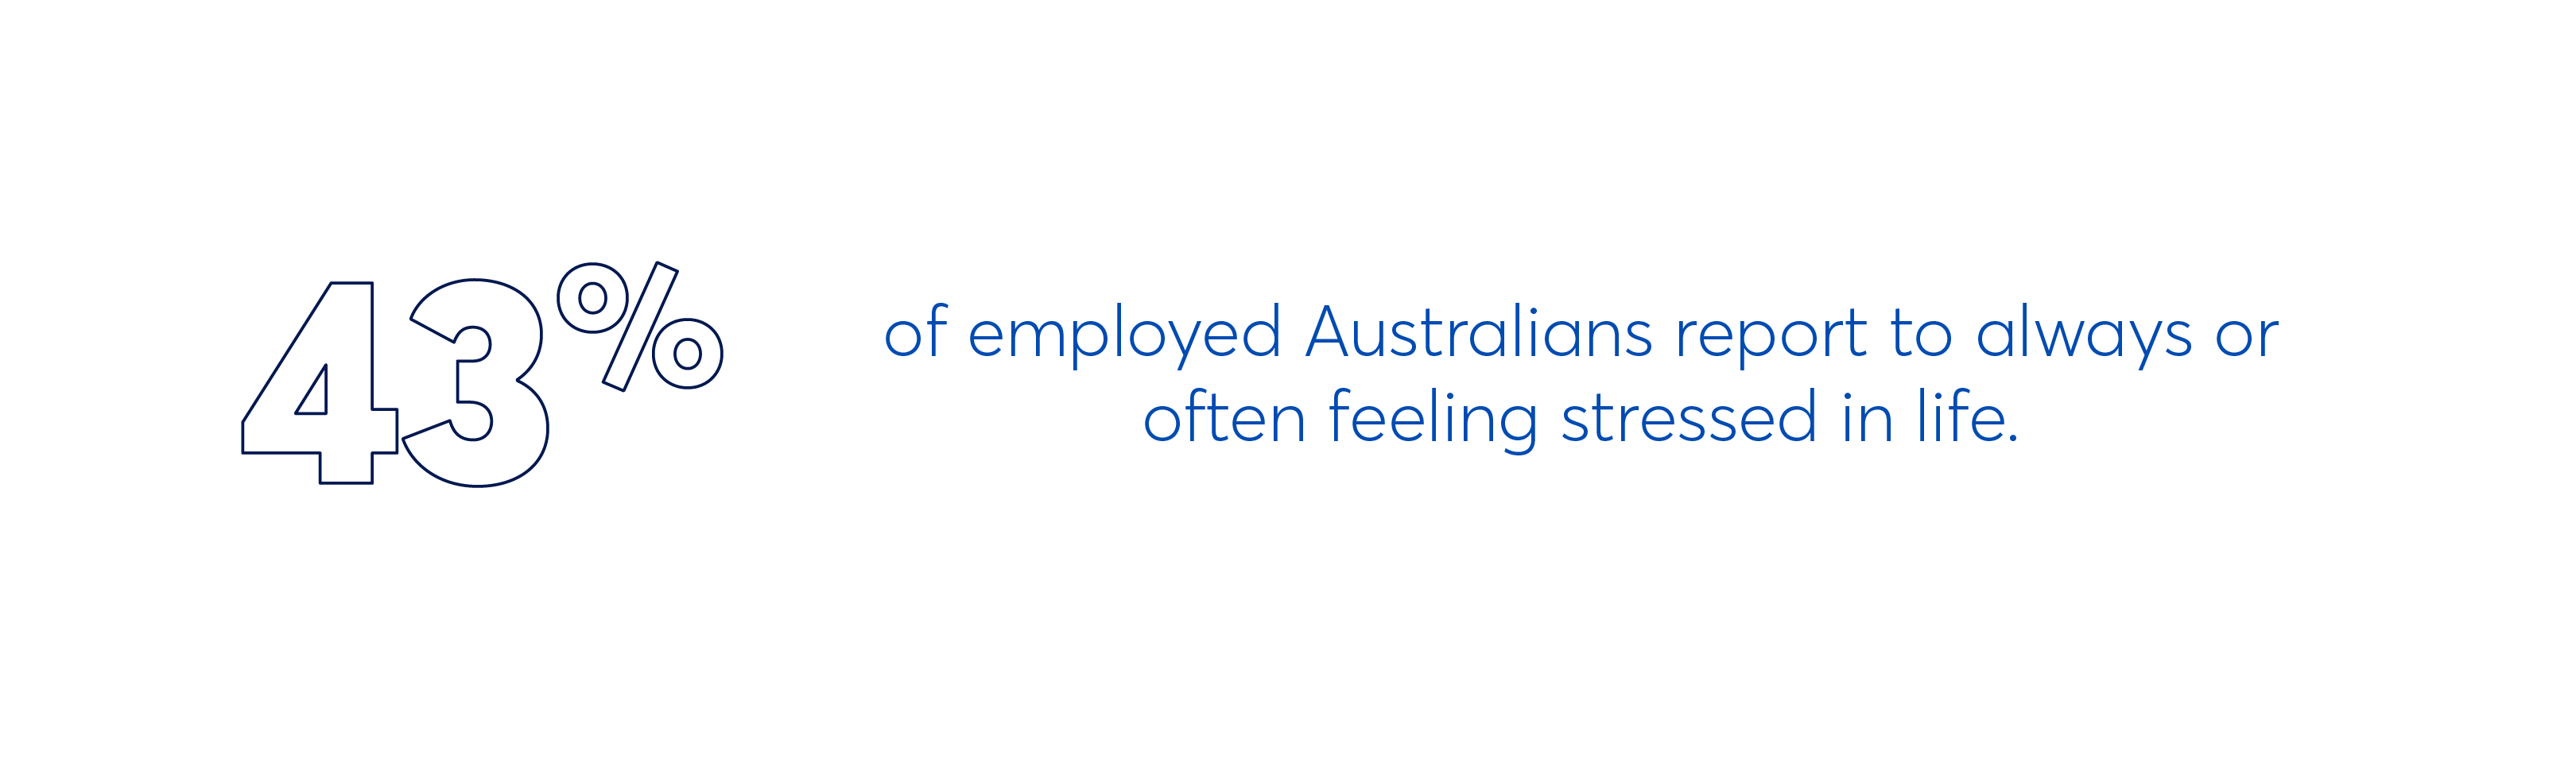 Aussies are often stressed